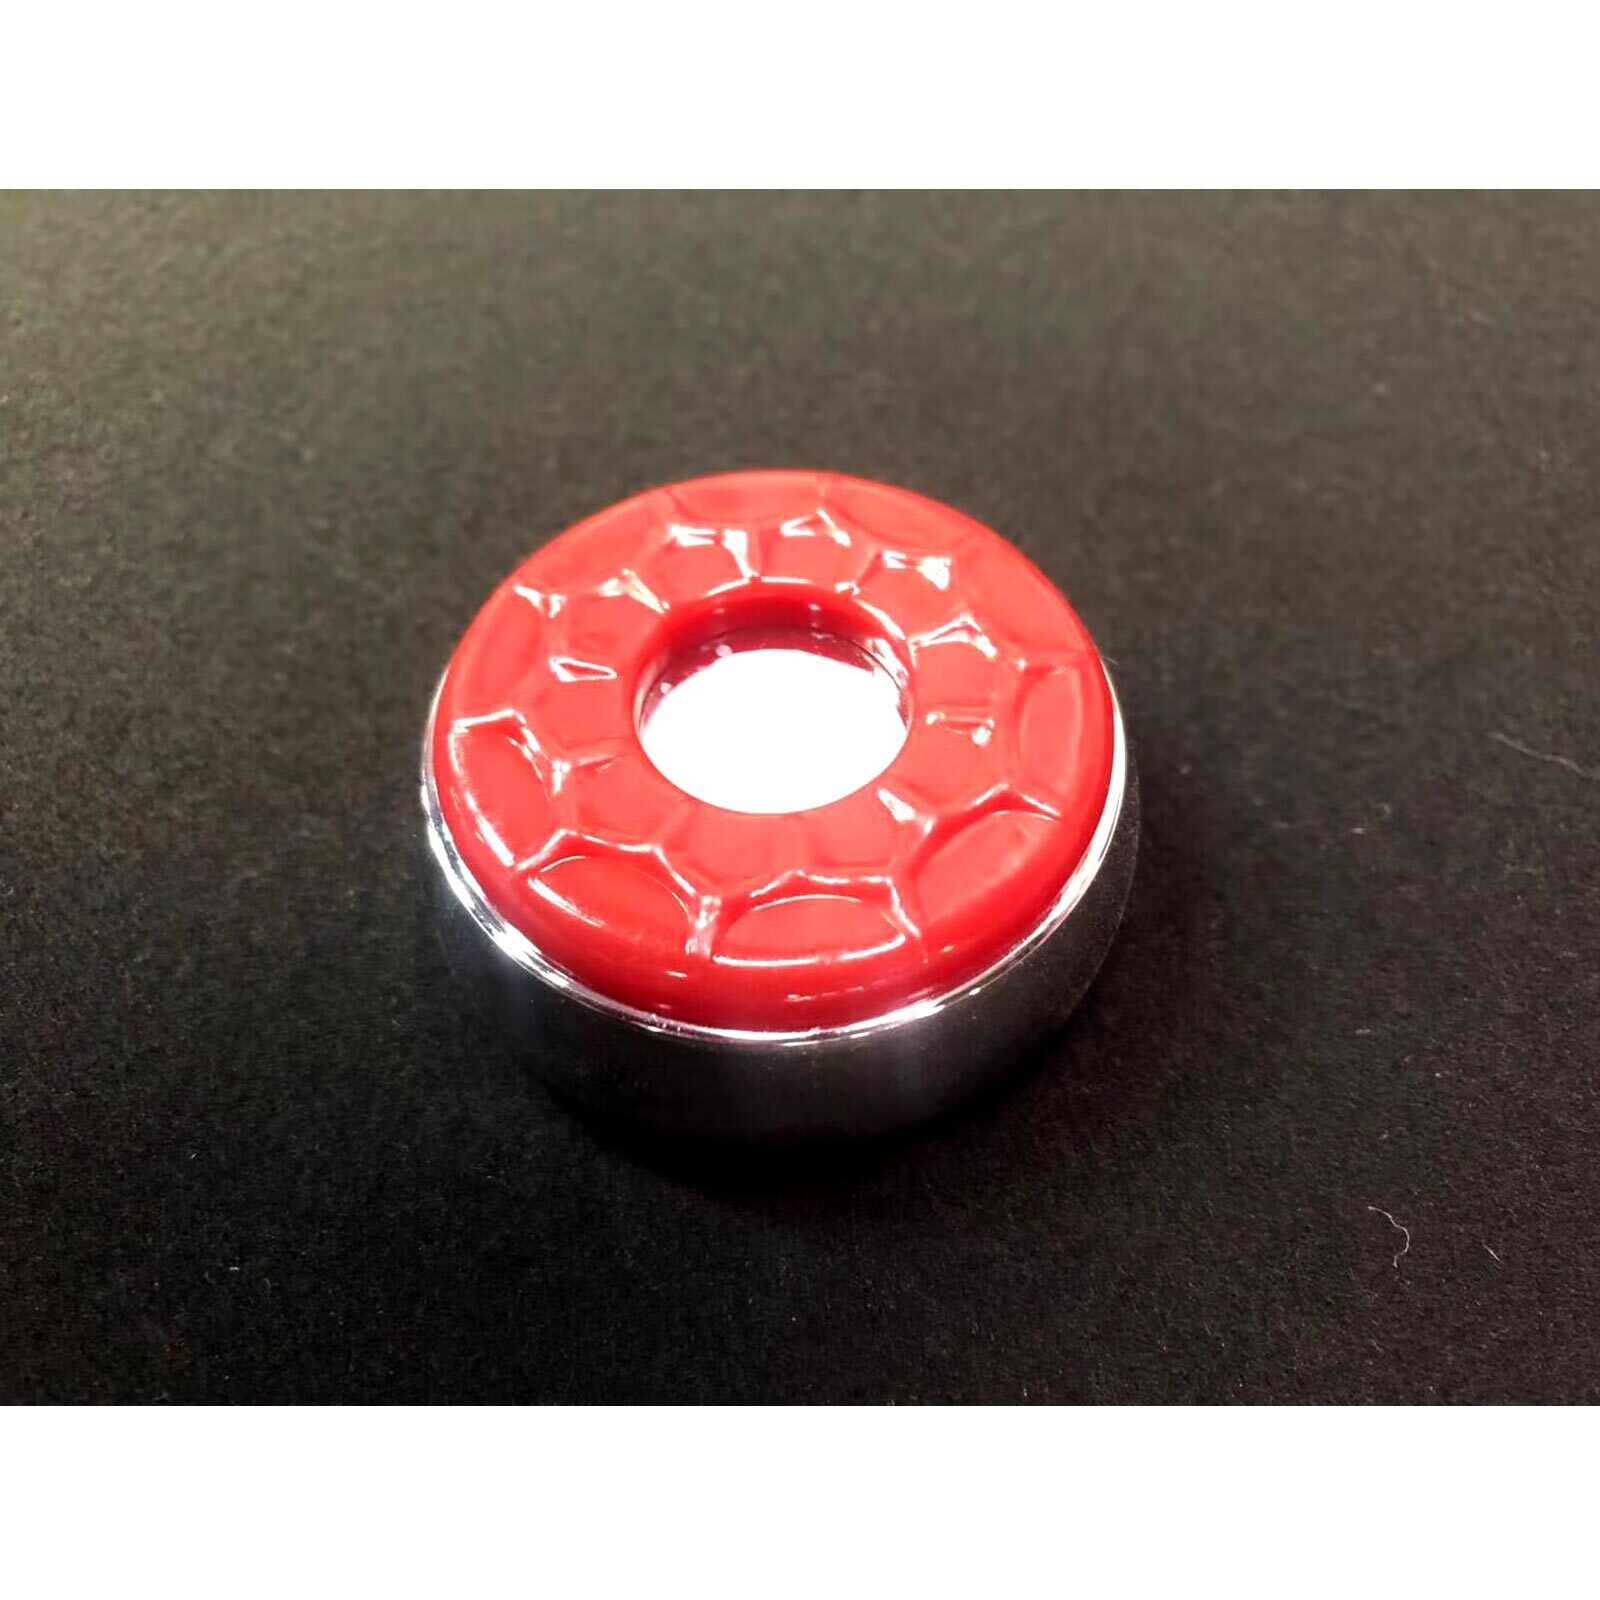 Shuffleboard puck, Blue or Red color